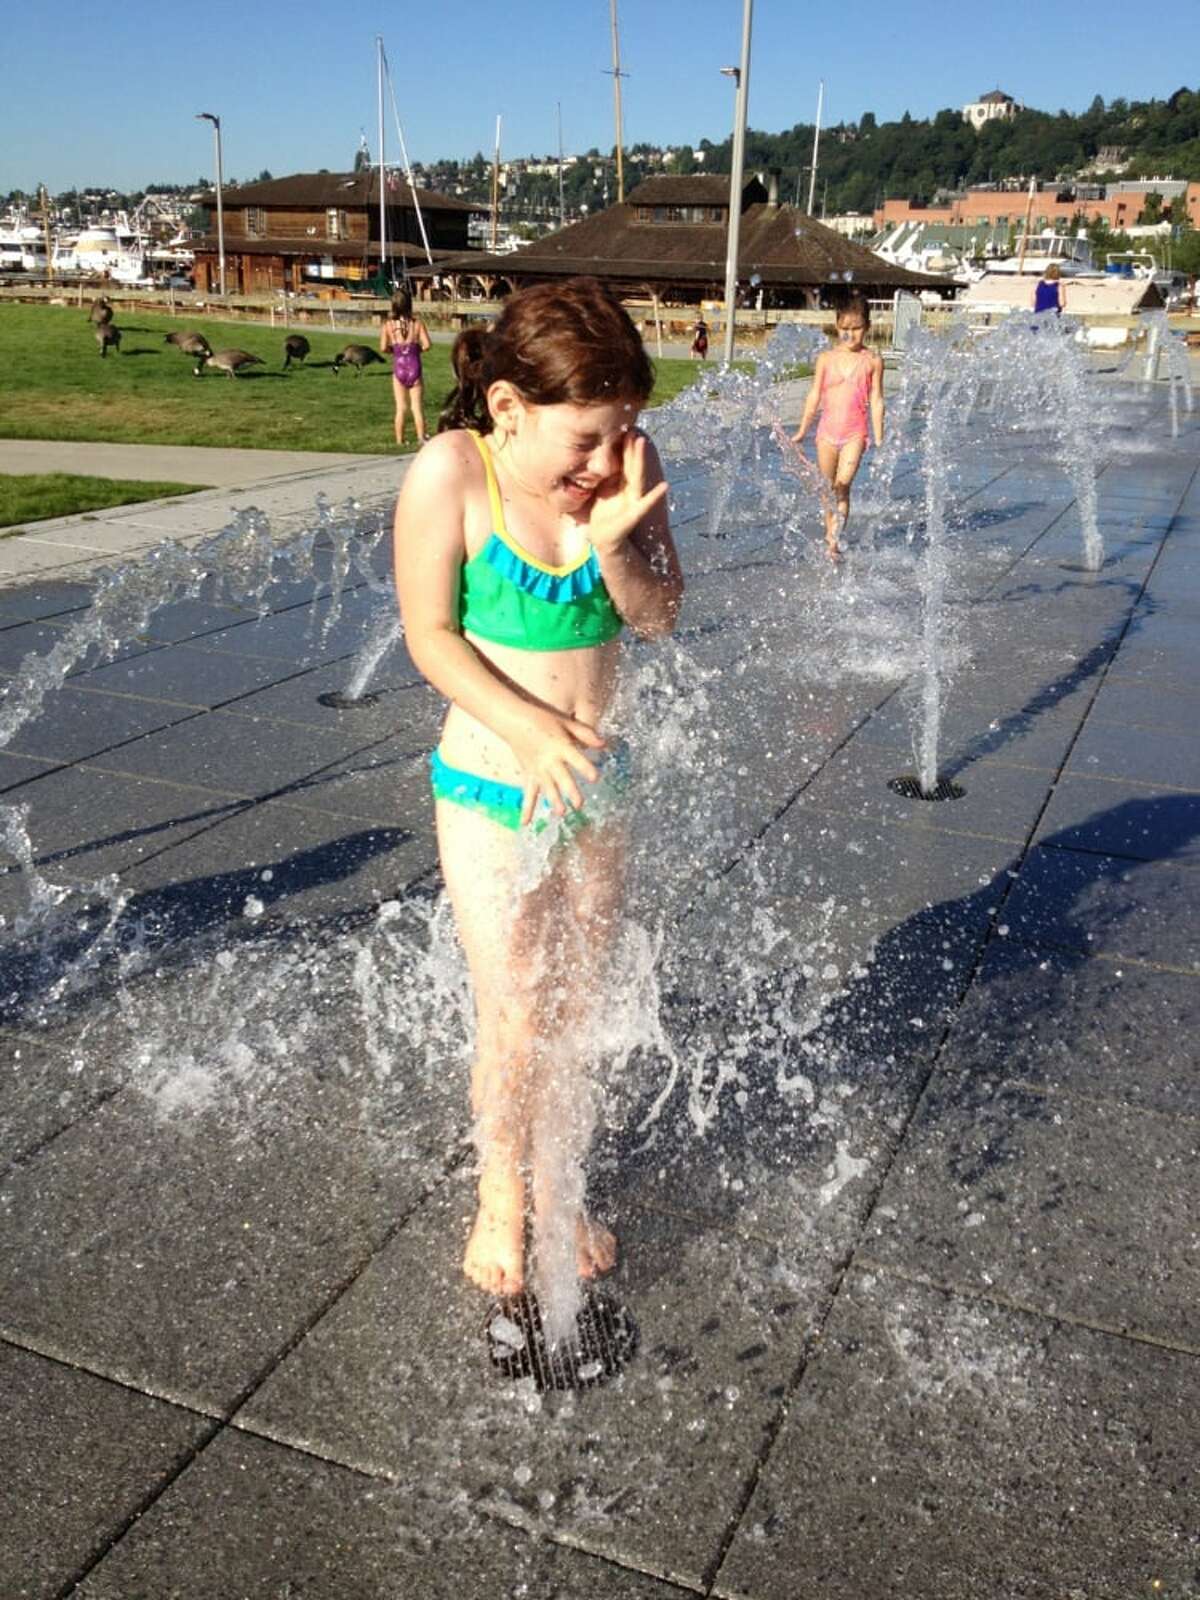 Sprayparks and wading pools will remain closed this summer.  "While the Governor has permitted pool use in phase 1.5 with very limited capacity, Seattle Parks and Recreation previously decided to focus staff resources to provide outdoor lifeguarded swimming areas for summer 2020," the city said. 